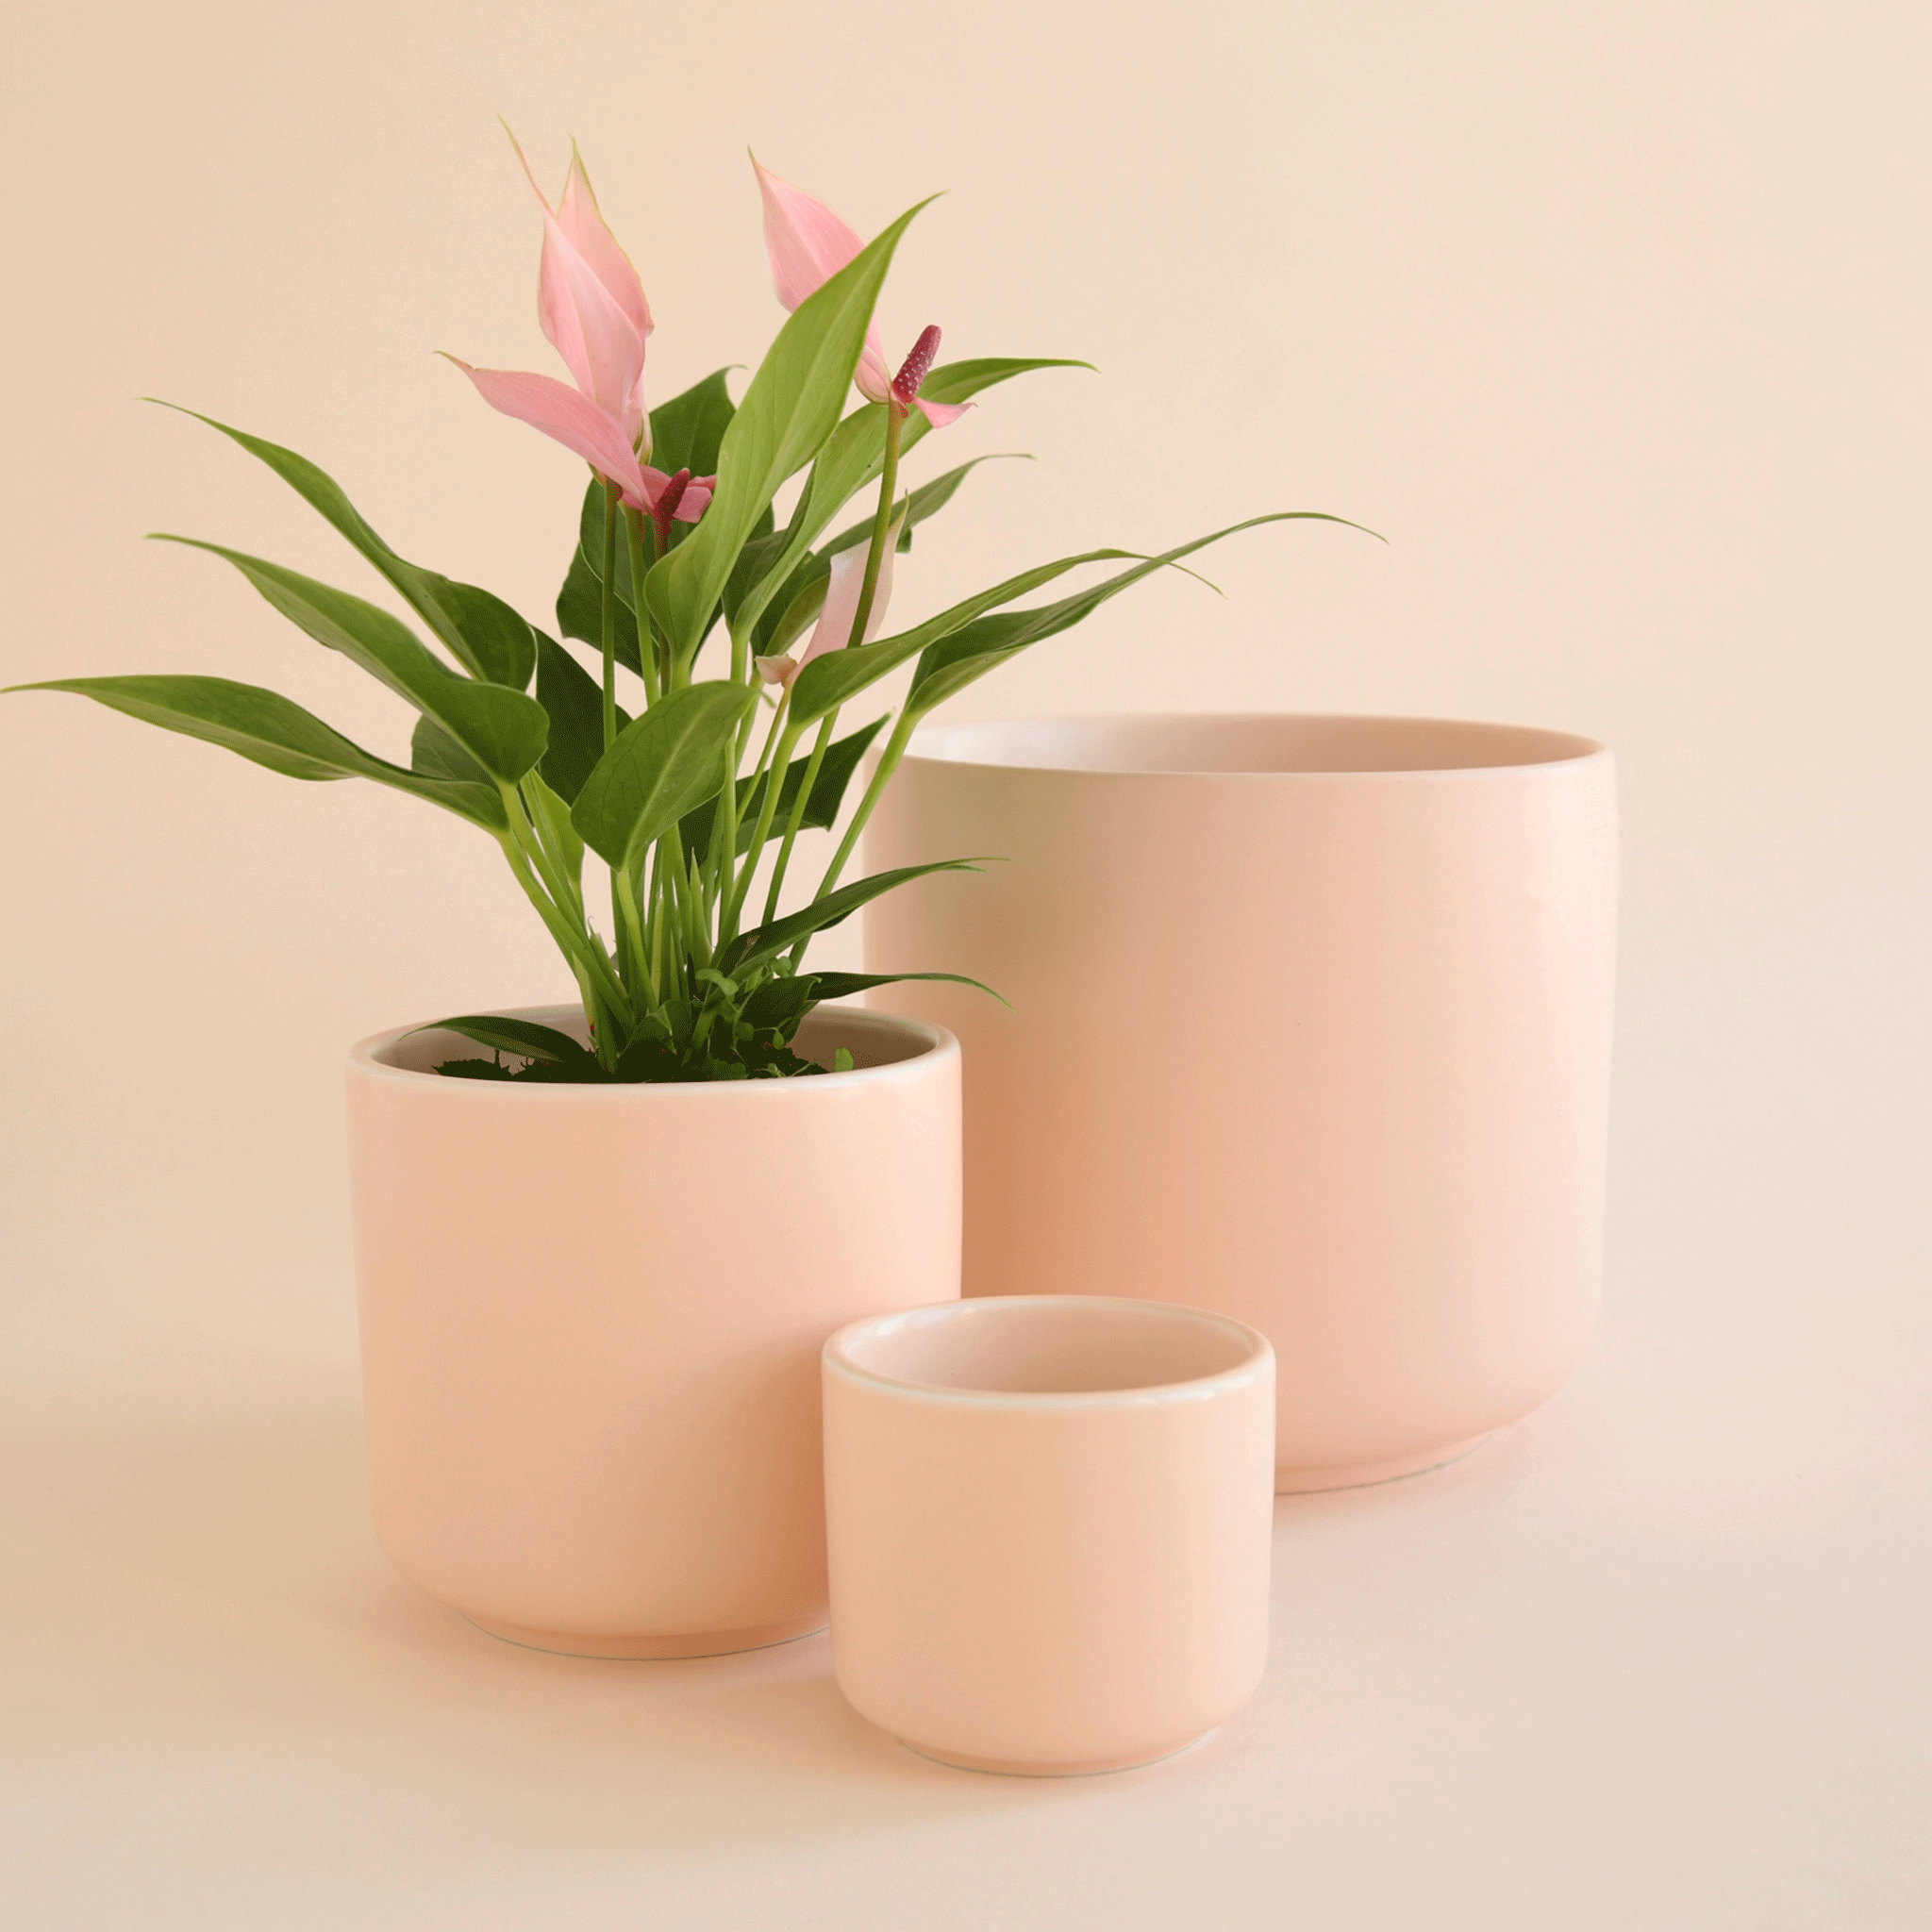 On a cream background is three different sized pink ceramic pots, one holding a anthurium plant.